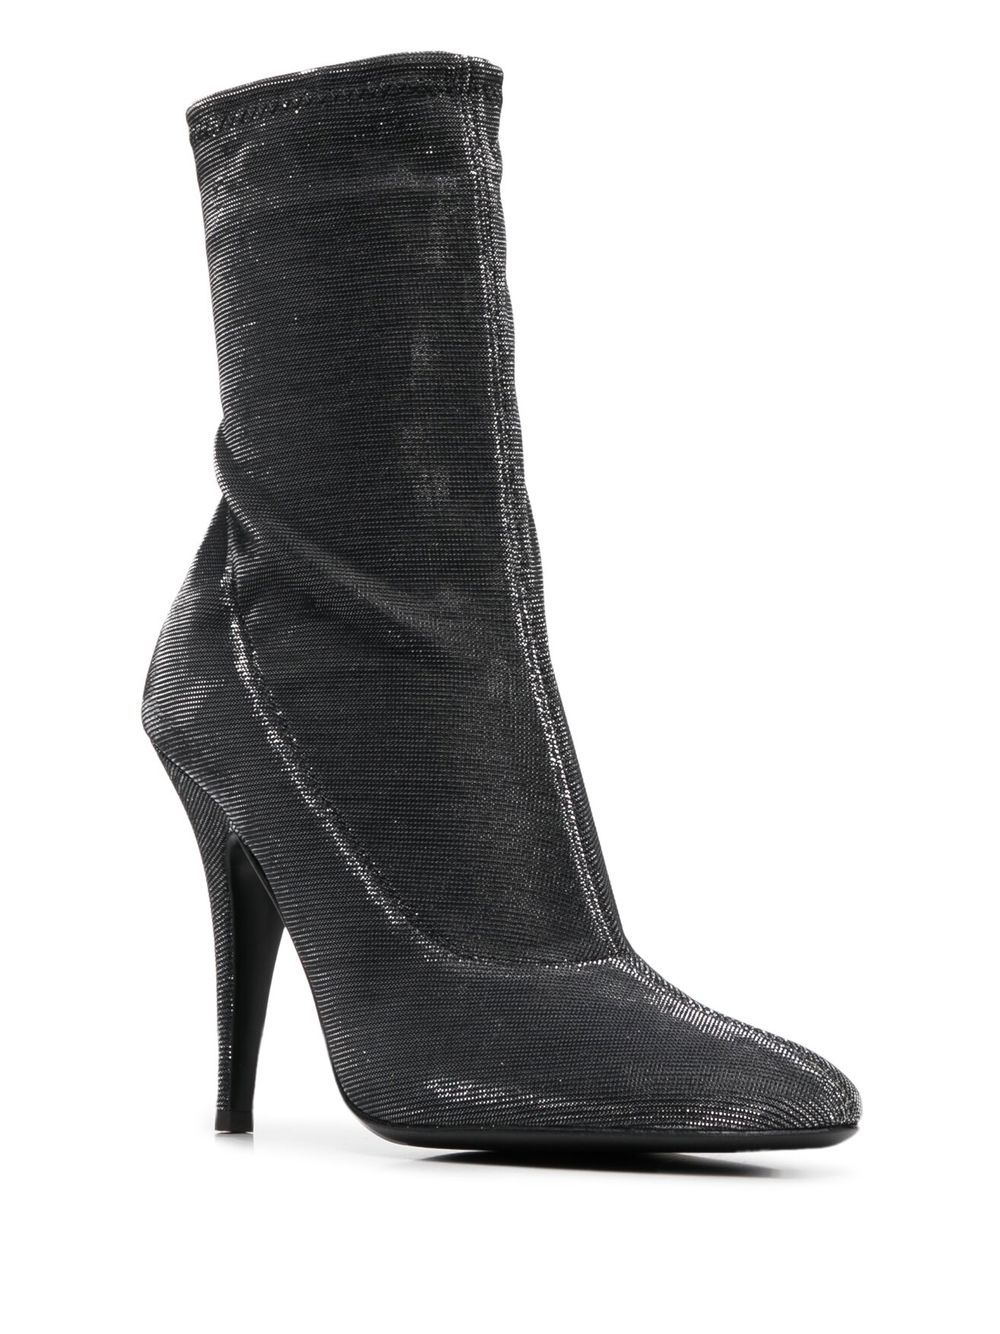 Giuseppe Zanotti Design GIUSEPPE ZANOTTI DESIGN- Leather Heel Ankle Boots